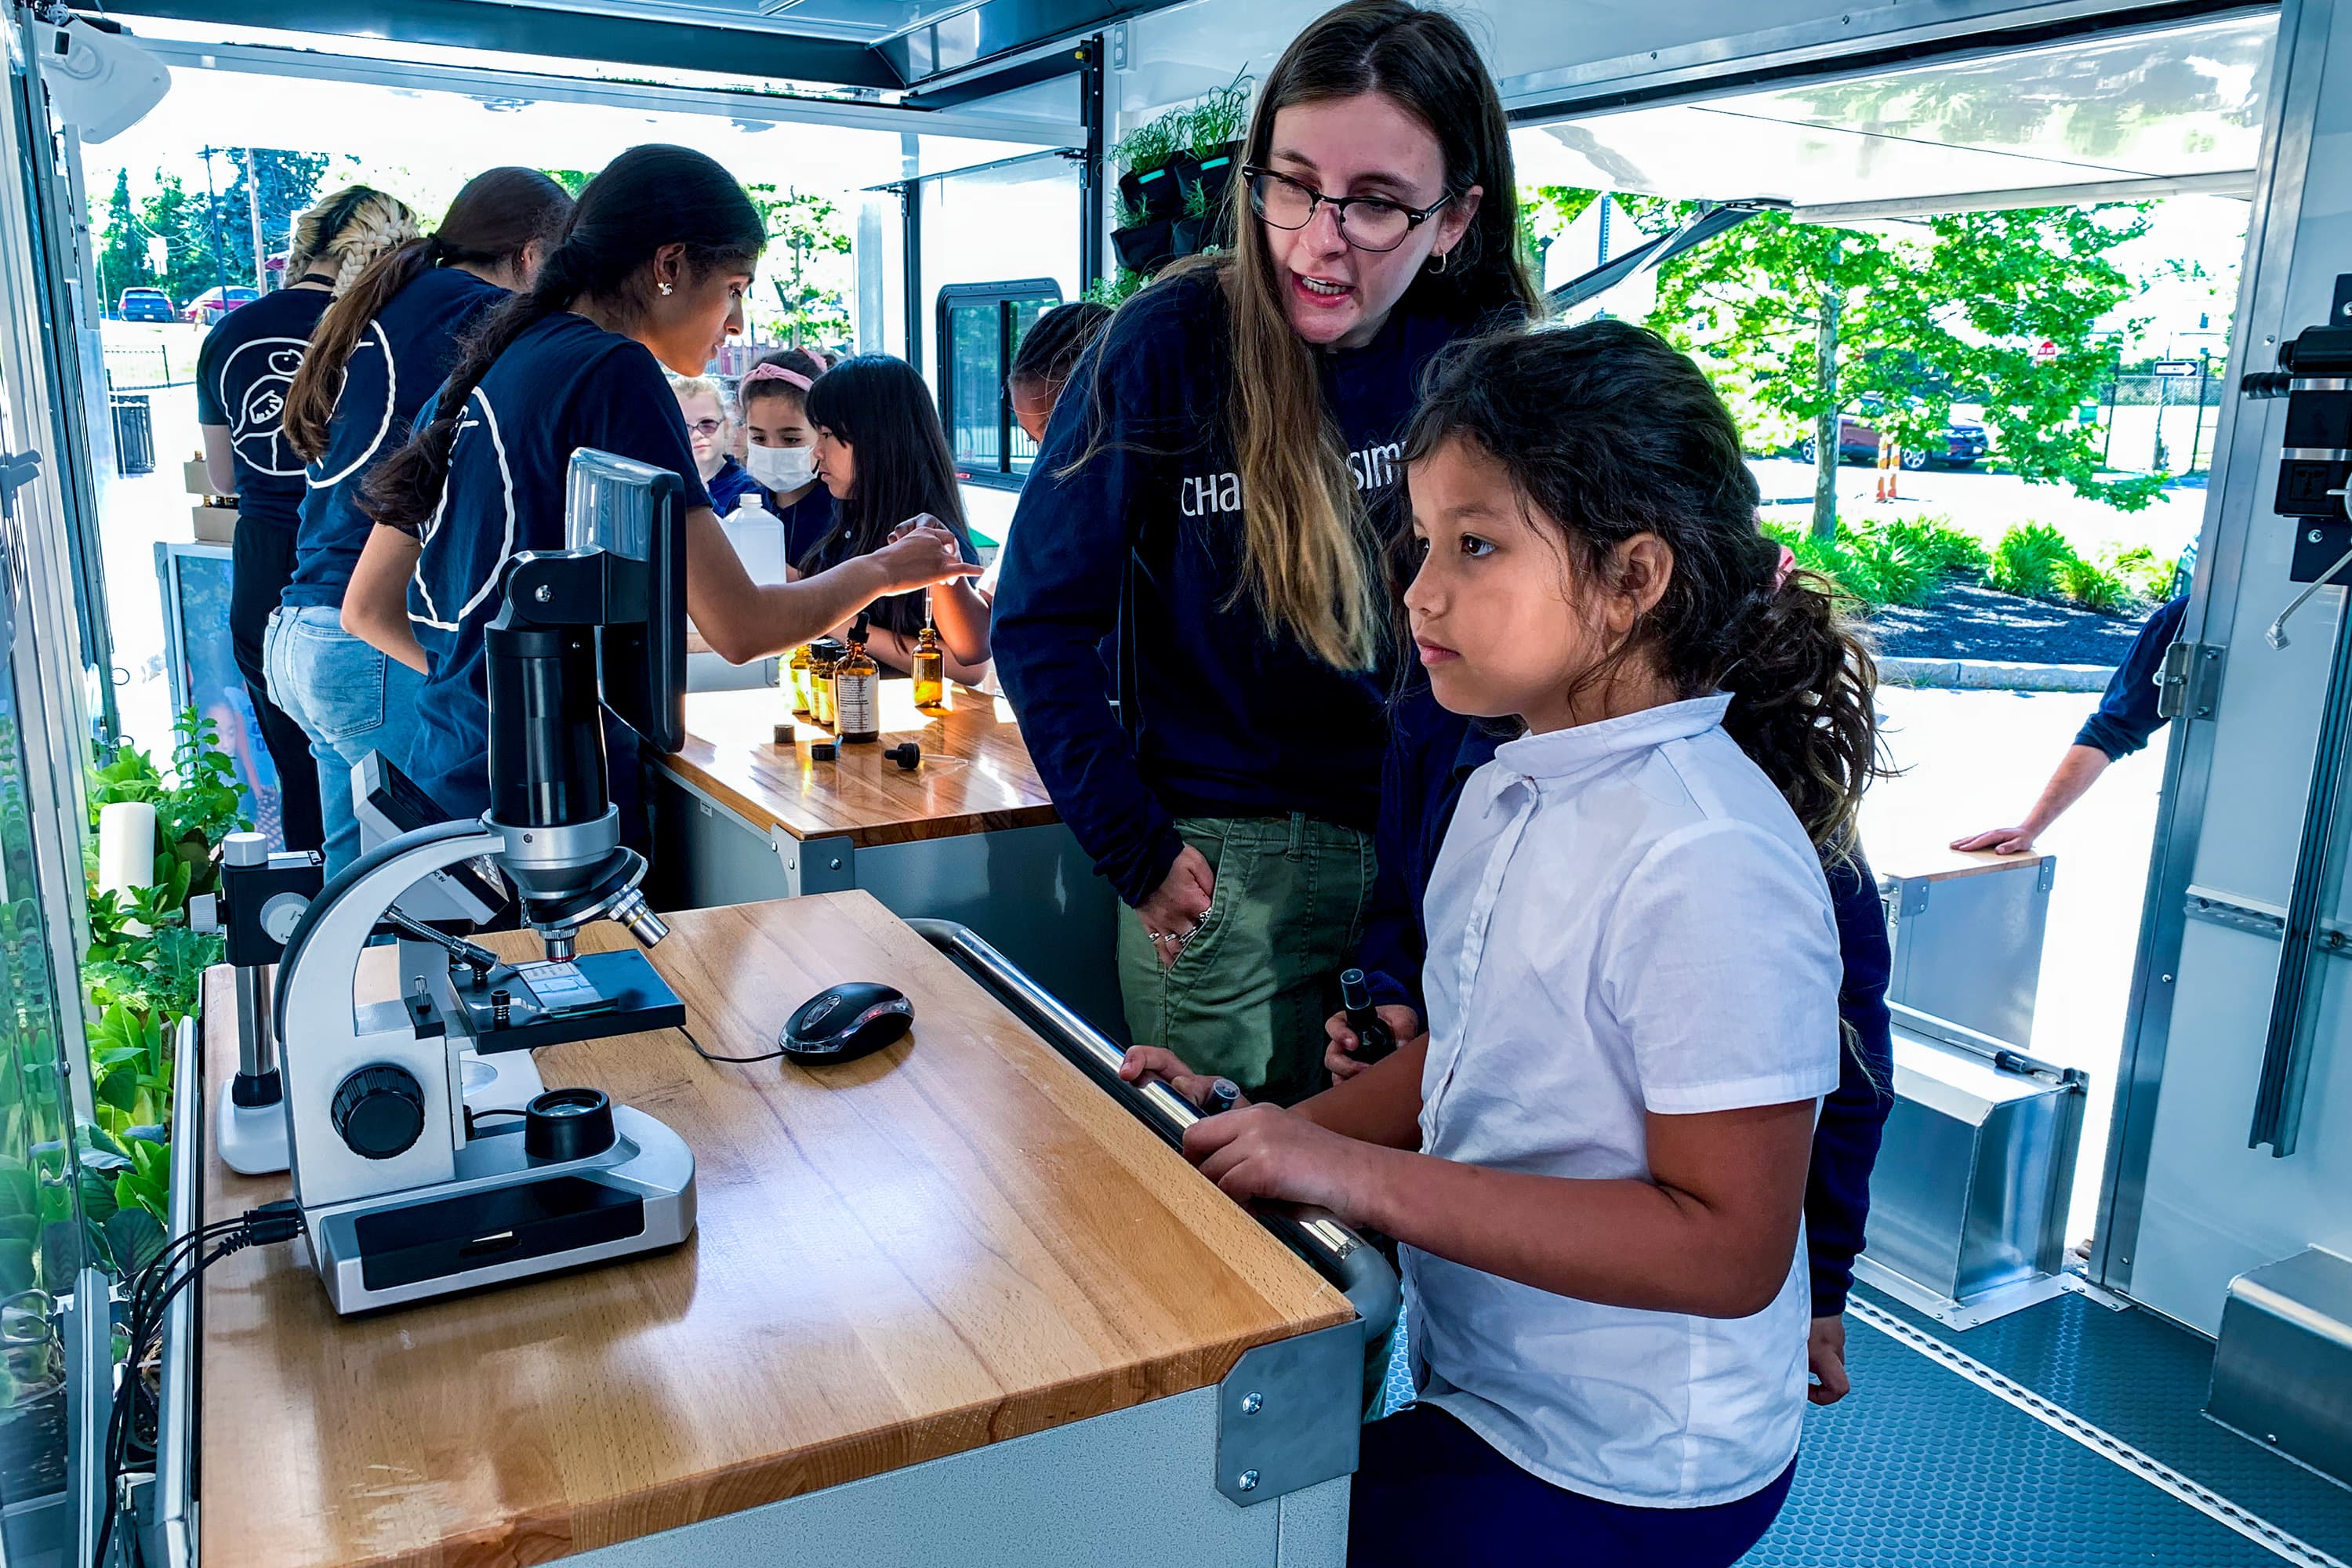 Change is Simple program director Skye Fournier with a Paul Revere Elementary student inside the nonprofit's mobile learning lab. (Courtesy Change is Simple)